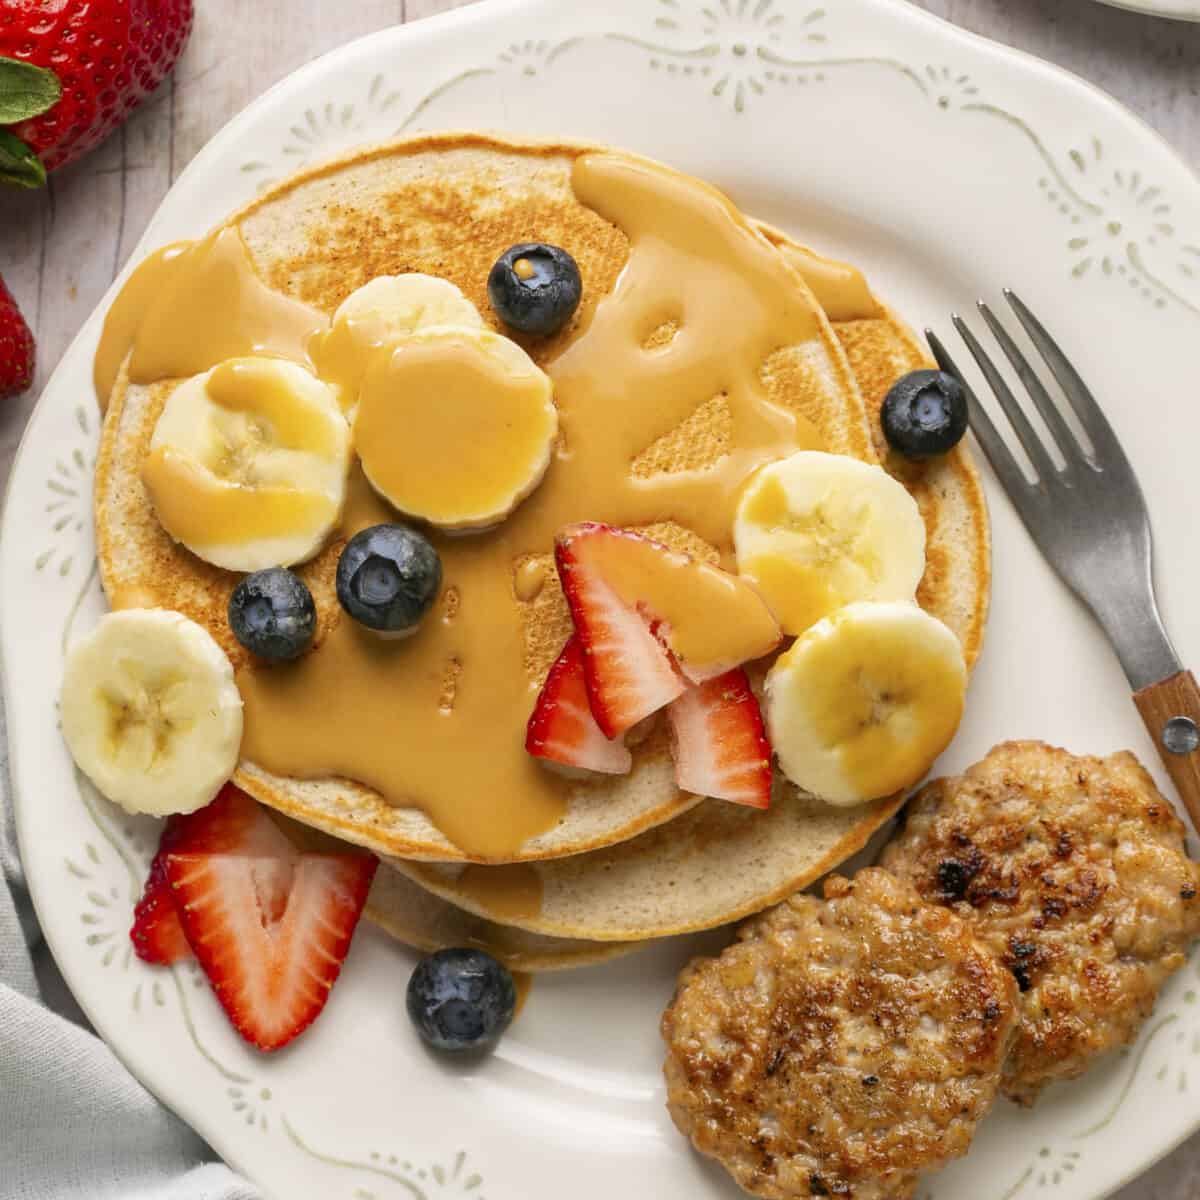 Pancakes on a plate with peanut butter sauce, sliced berries and sliced bananas on top with a side of sausage patties.